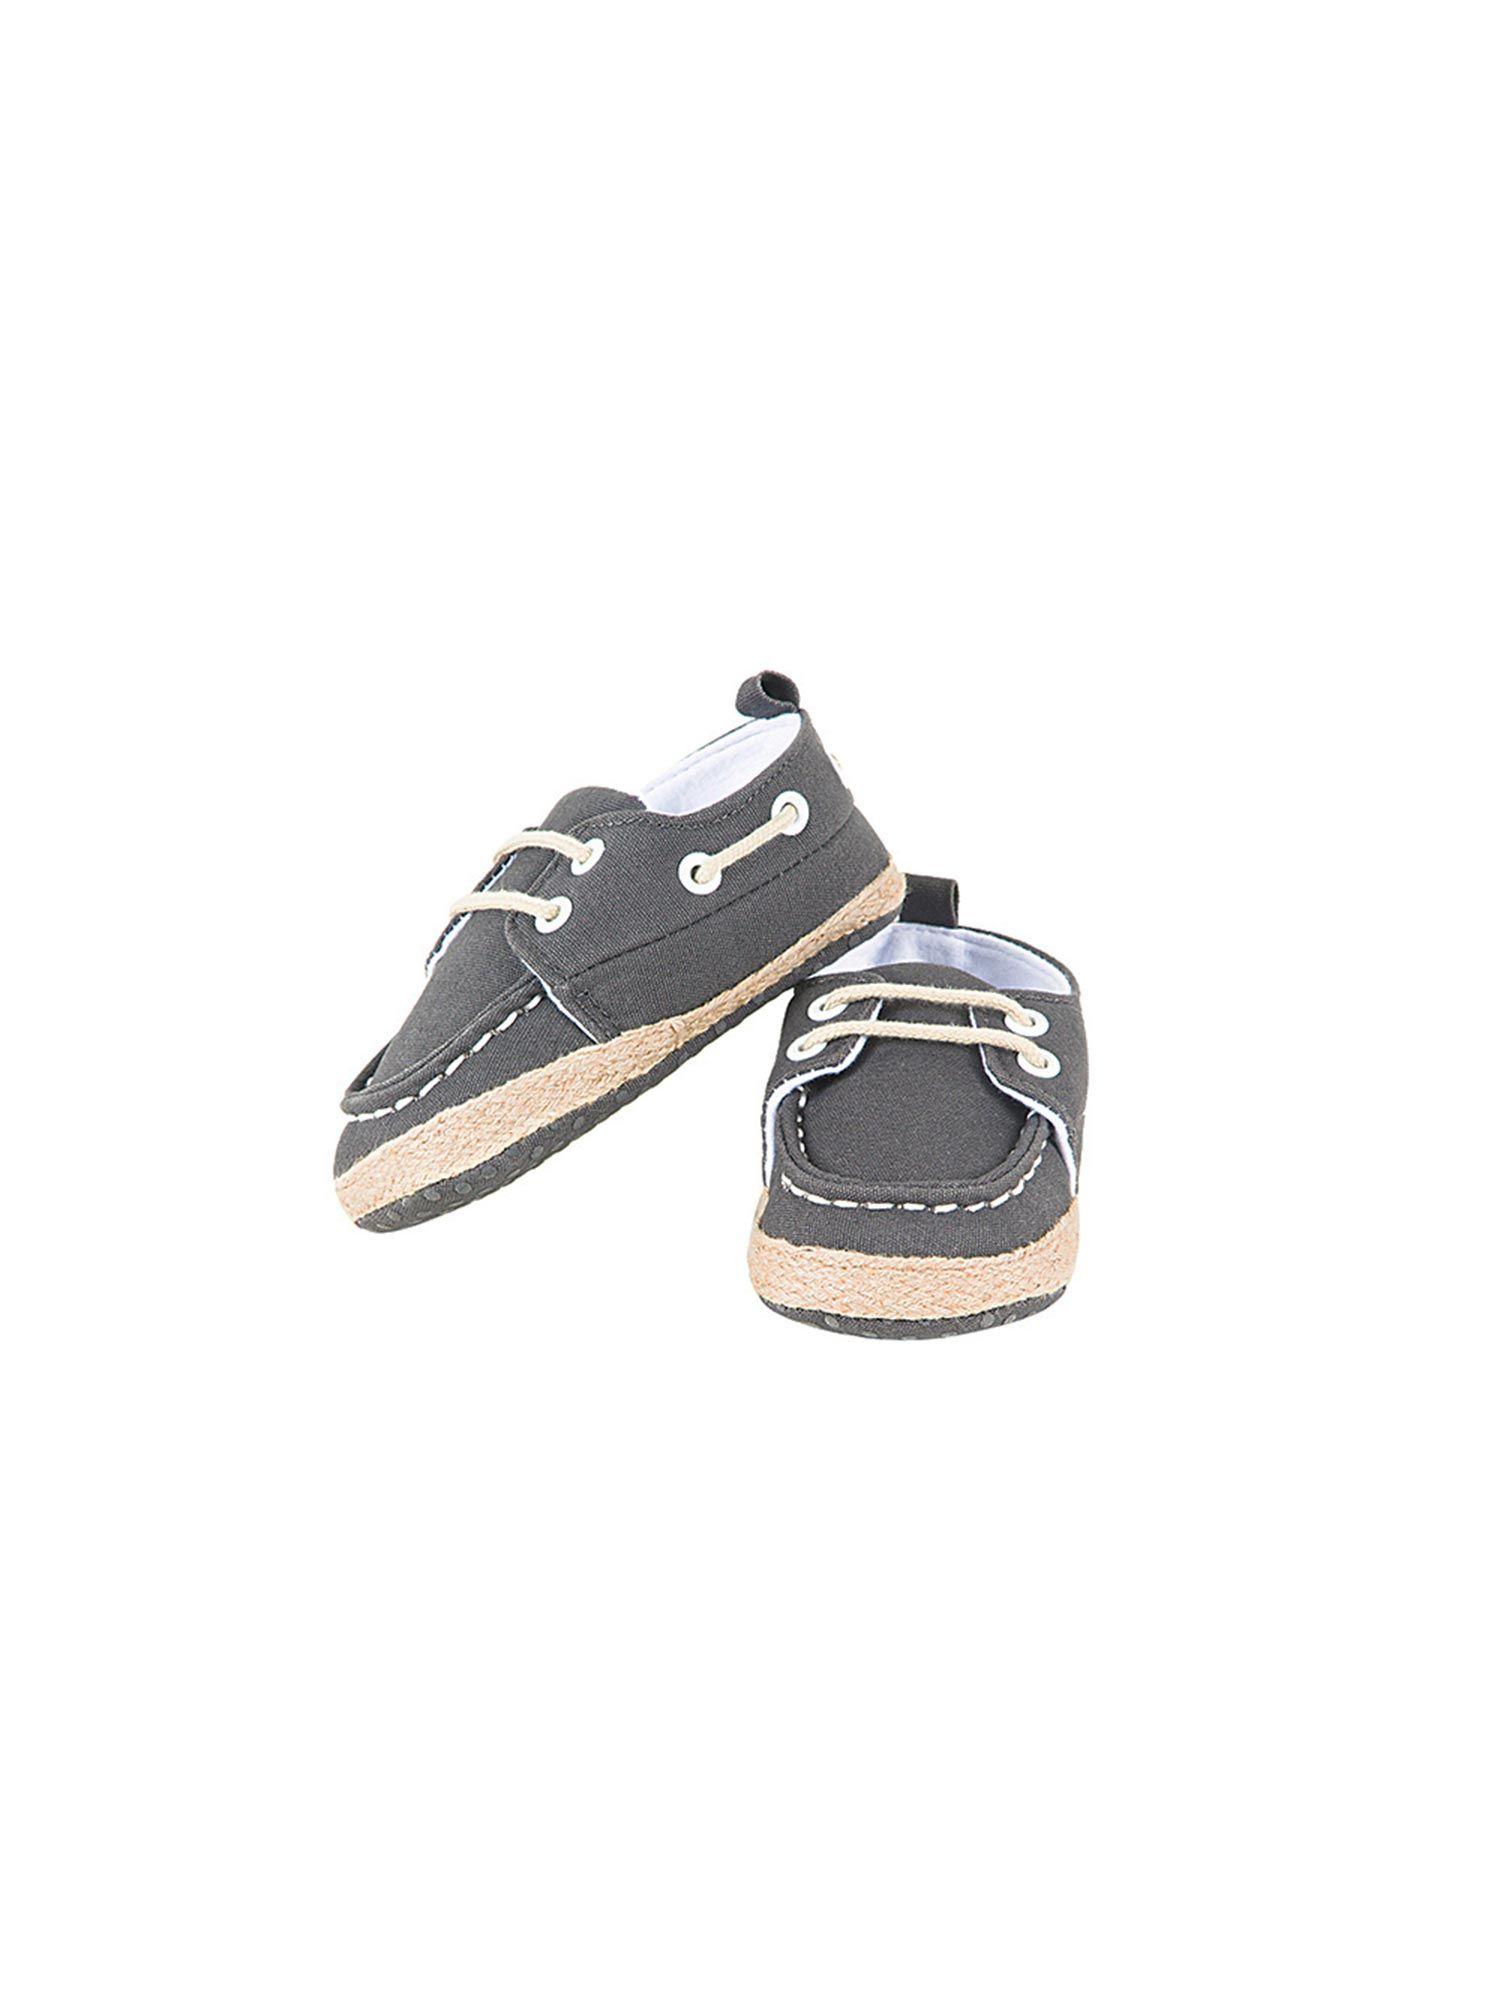 formal-grey-baby-boat-shoes